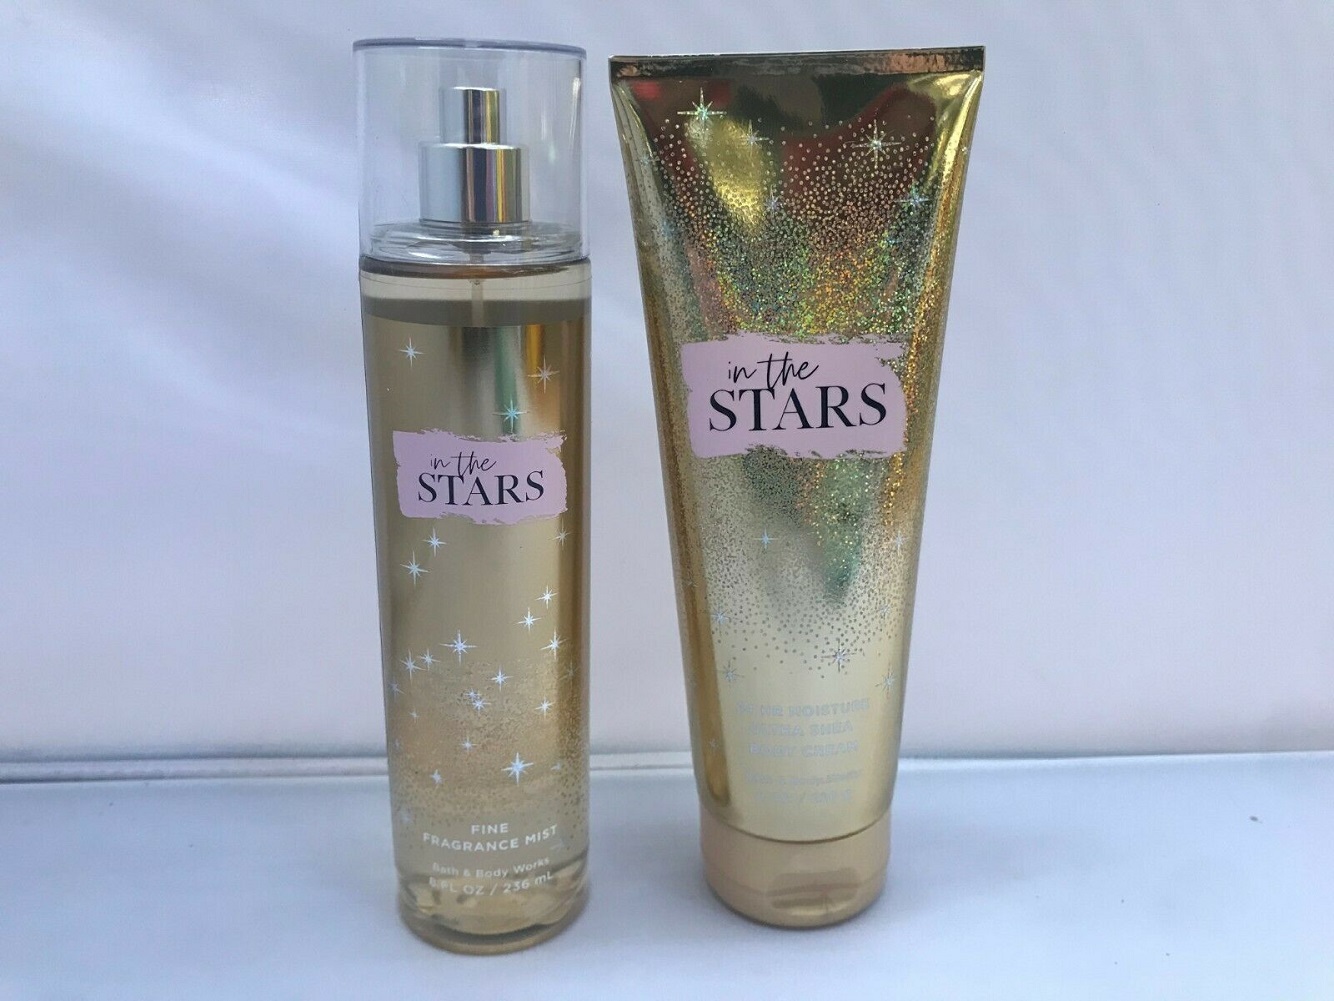 SET BATH AND BODY WORKS IN THE STARS FRAGRANCE MIST AND BODY CREAM